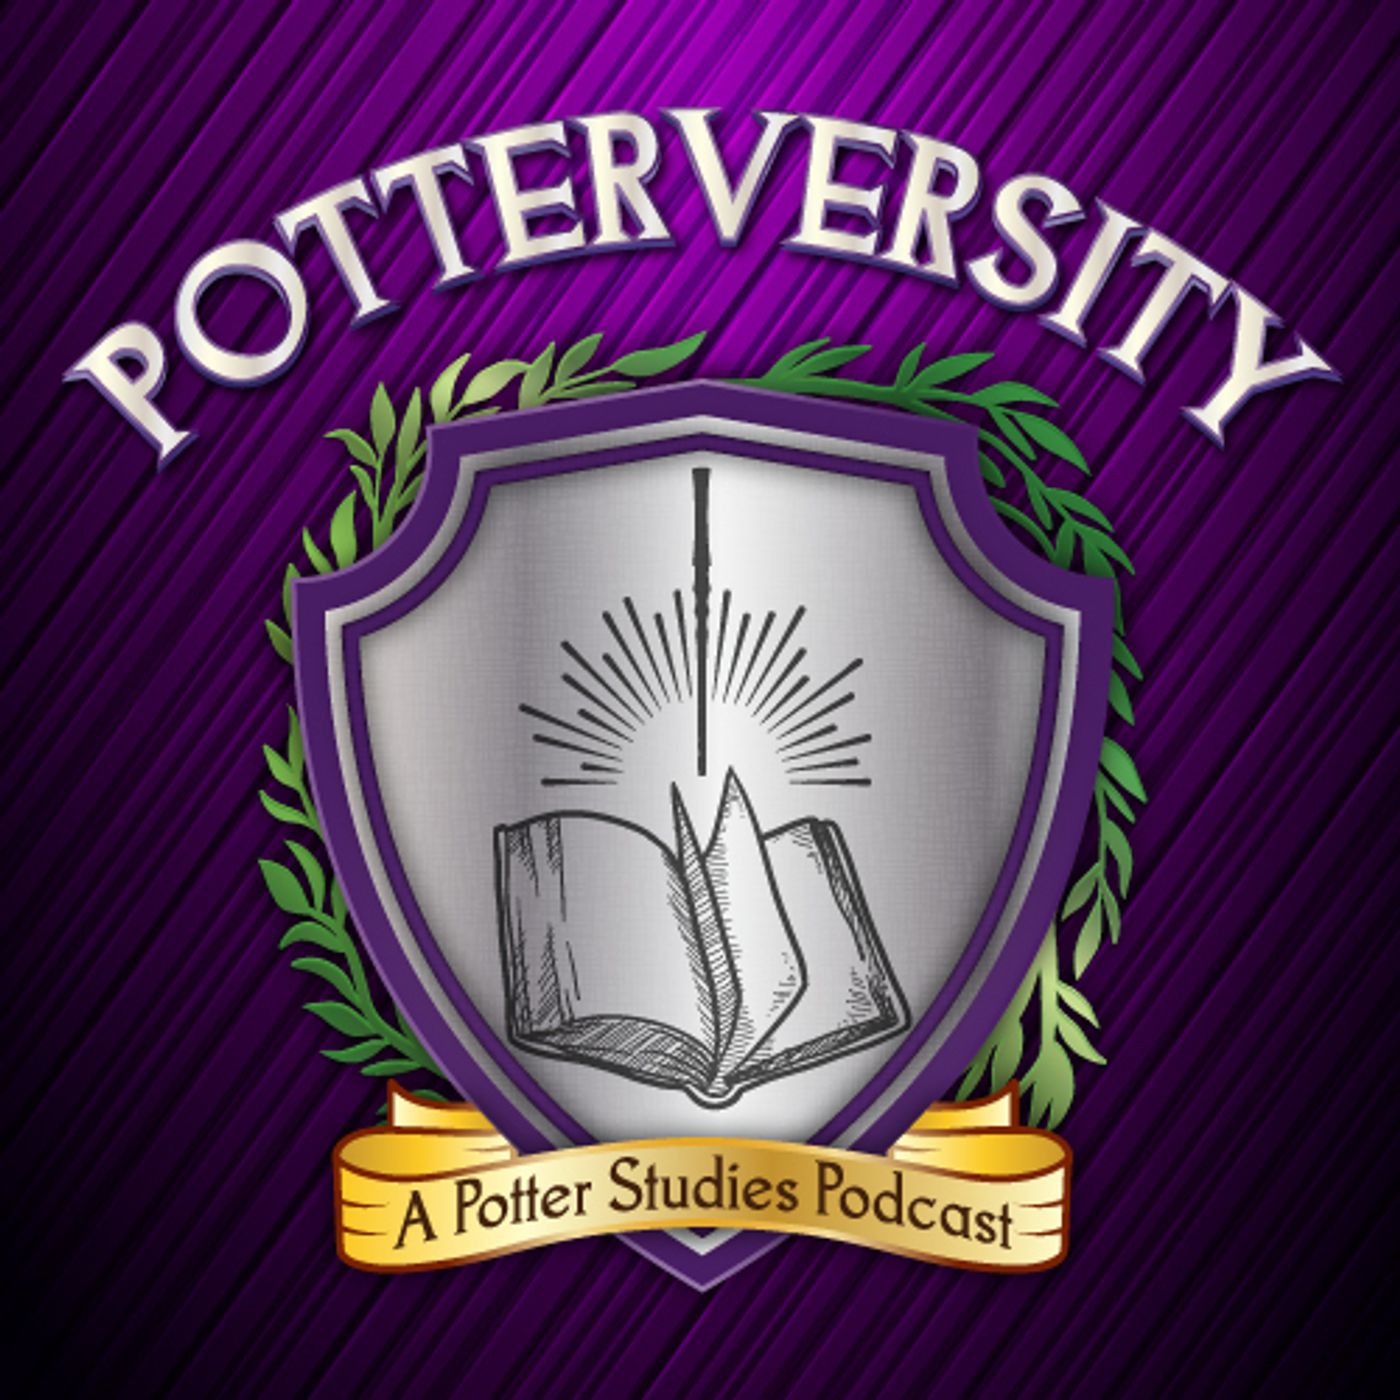 Potterversity Episode 7: The Puffs' Perspective